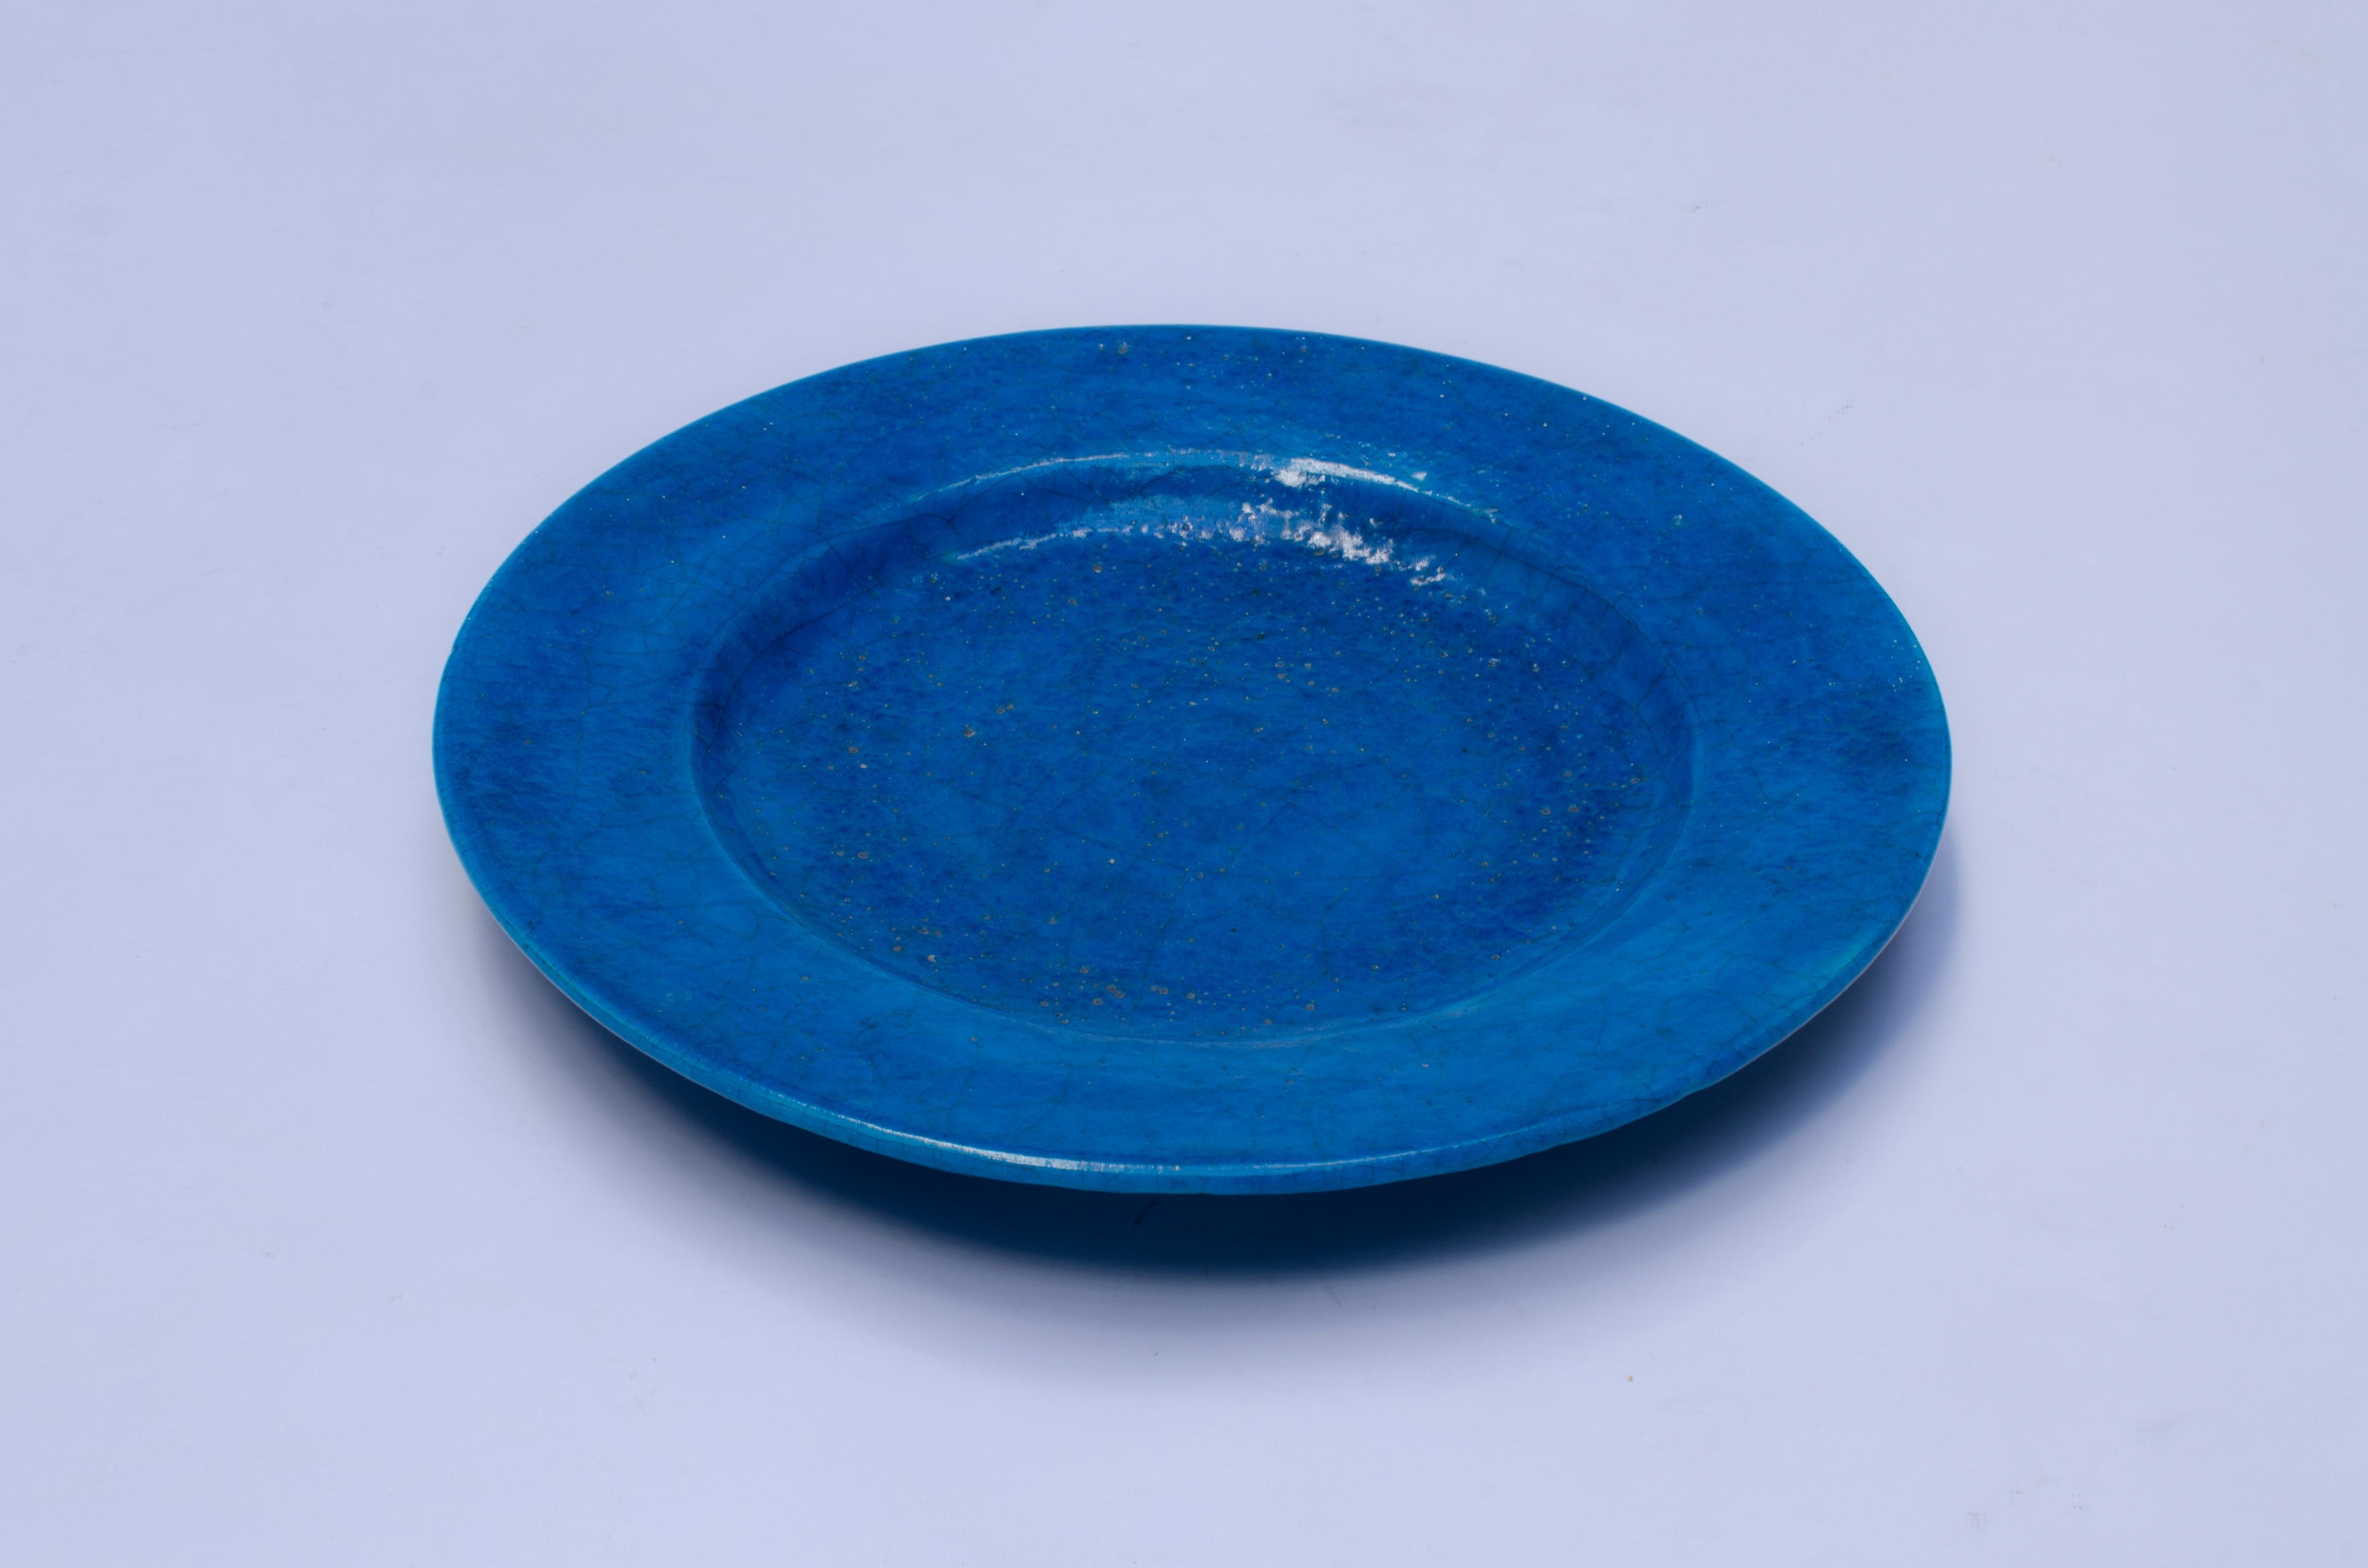 Enamel ceramic plate in “blue-turquoise” color made by Jean Besnard (1889-1958). Signed Jean Besnard.

France, CIRCA 1930.